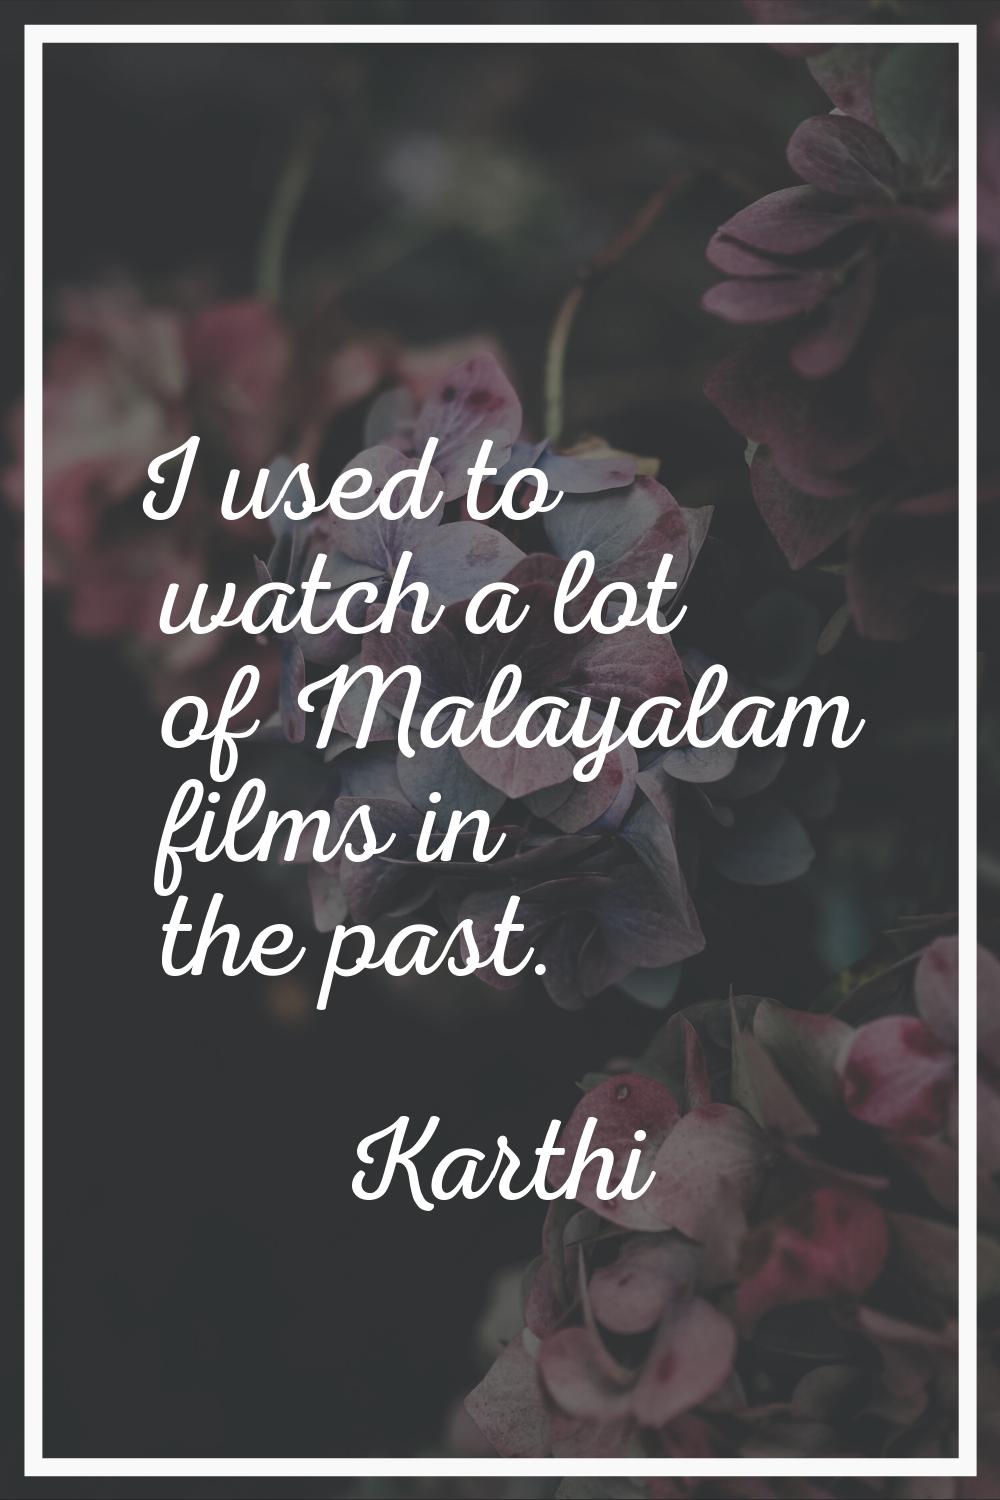 I used to watch a lot of Malayalam films in the past.